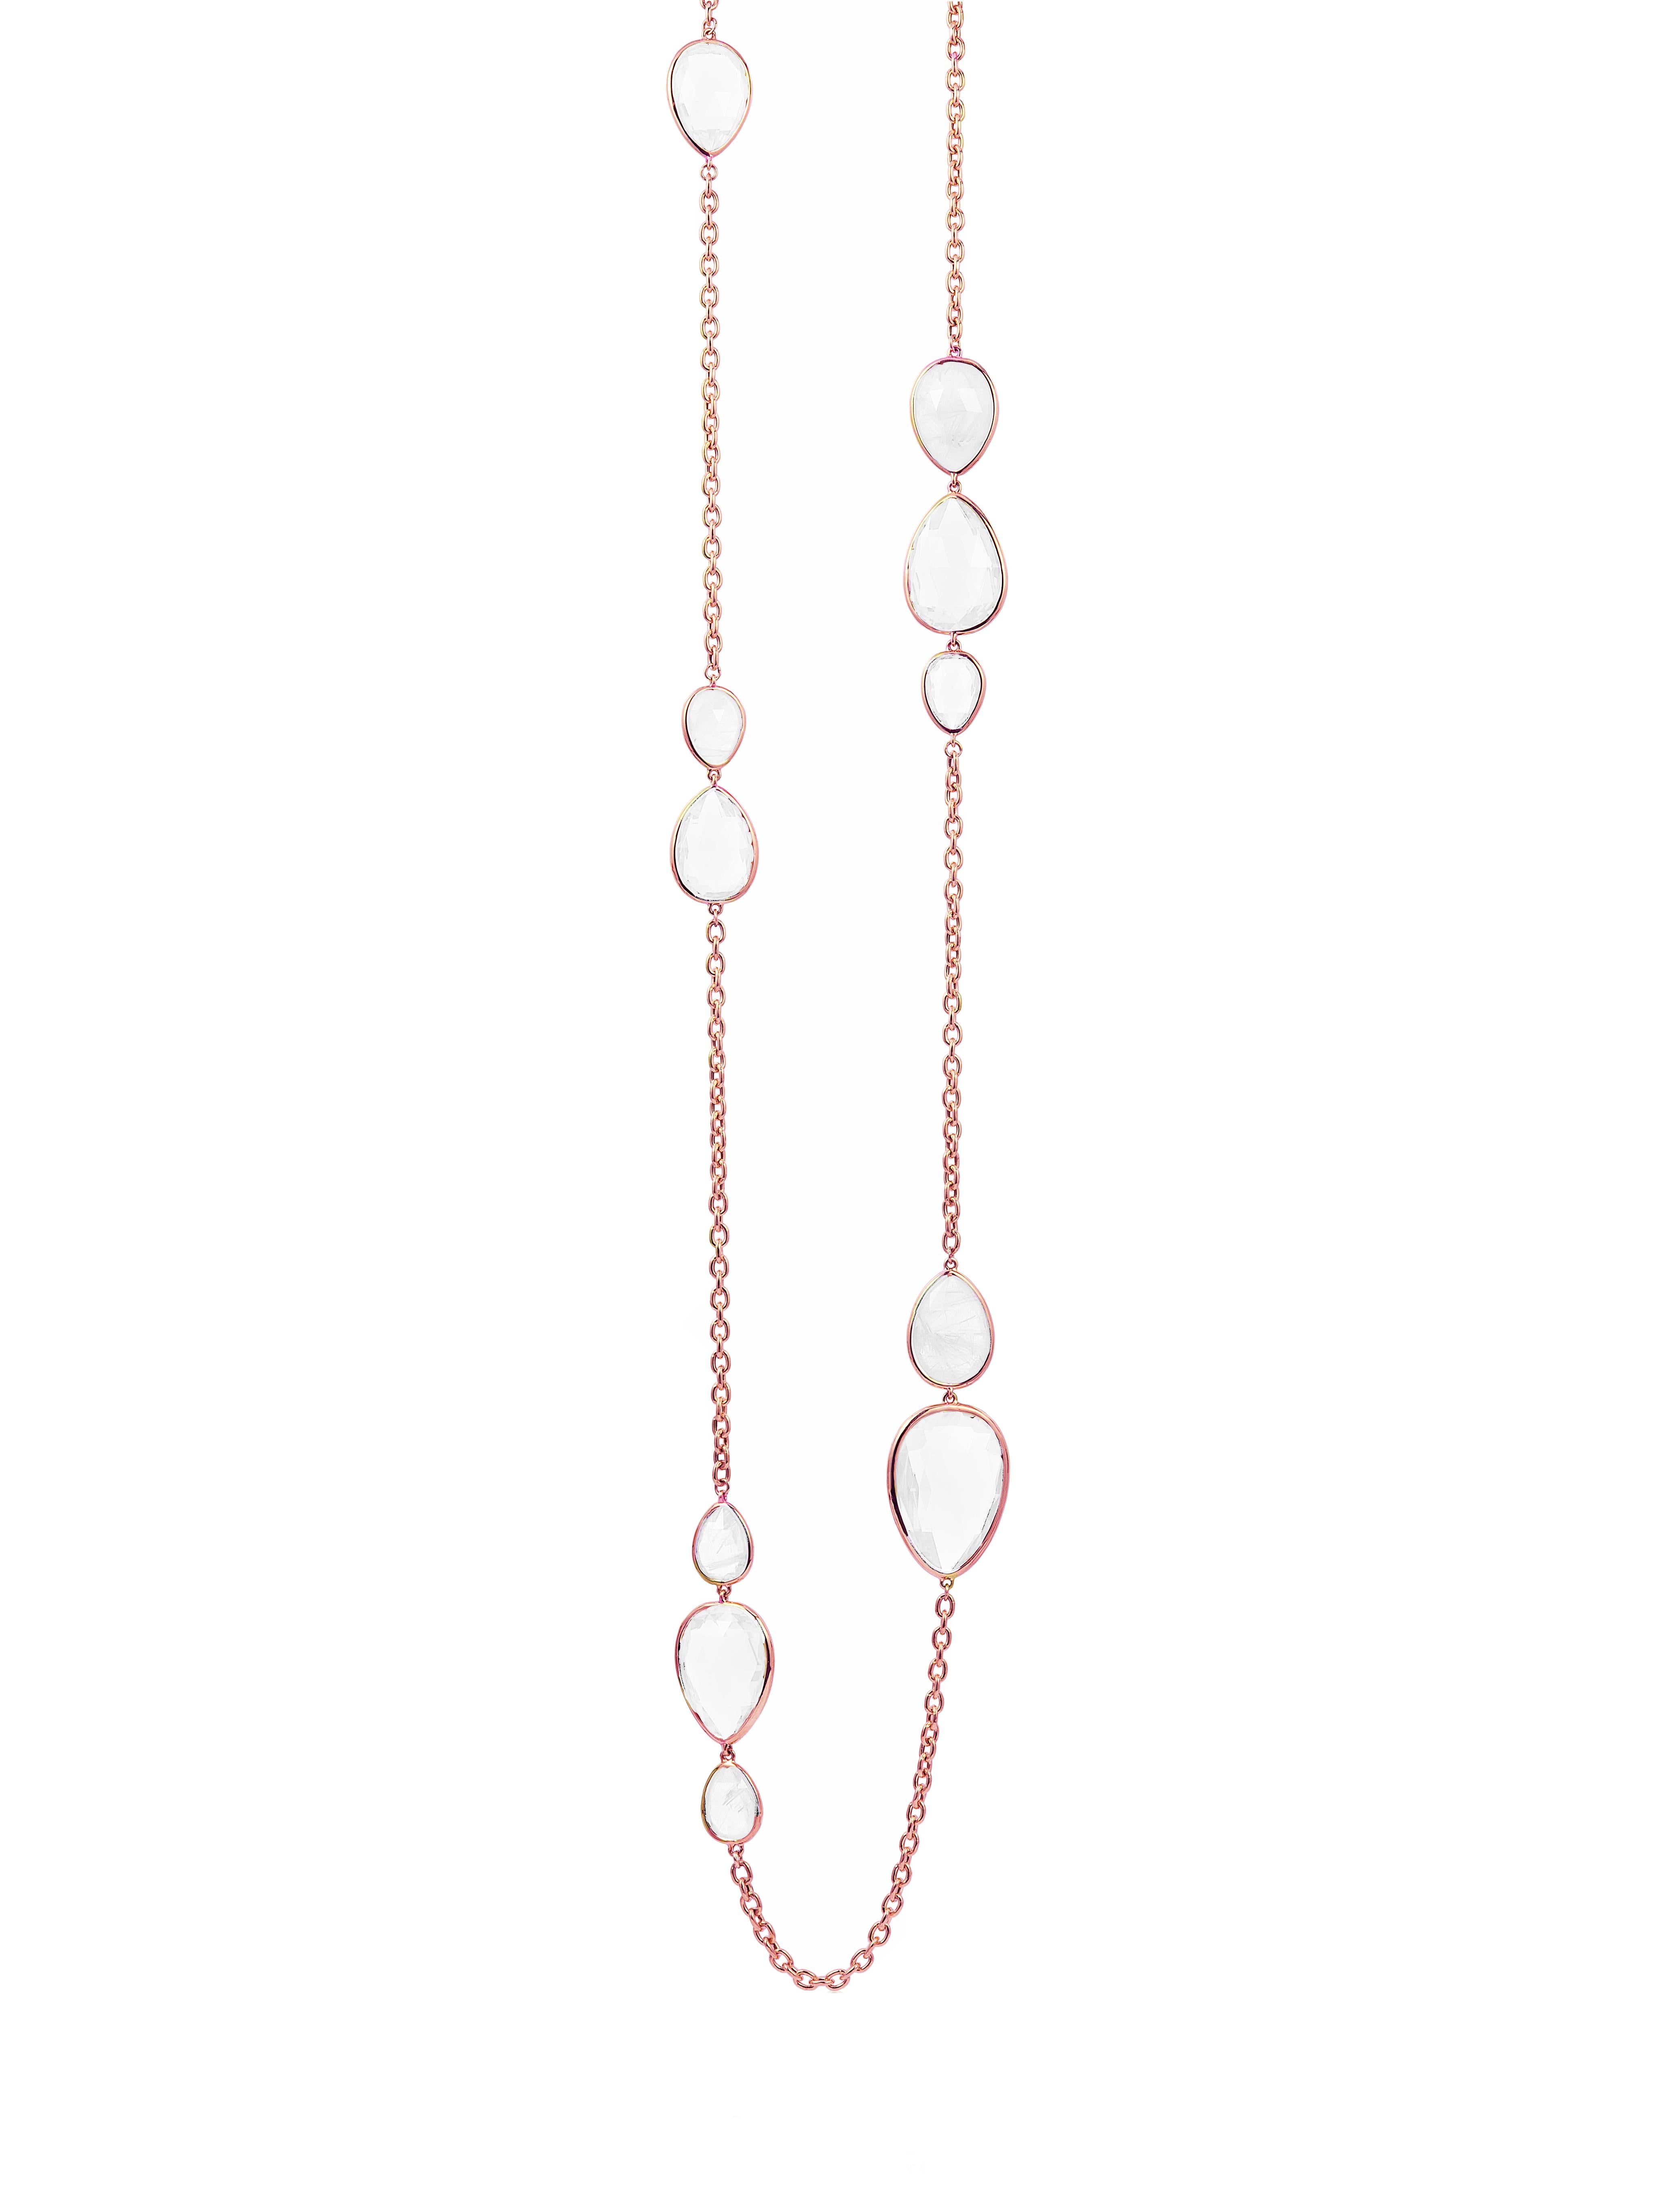 Rock Crystal Pear Shape Briolette Necklace on Oval Link Chain in 18K Pink Gold, from ‘Gossip’ Collection  
Length: 36